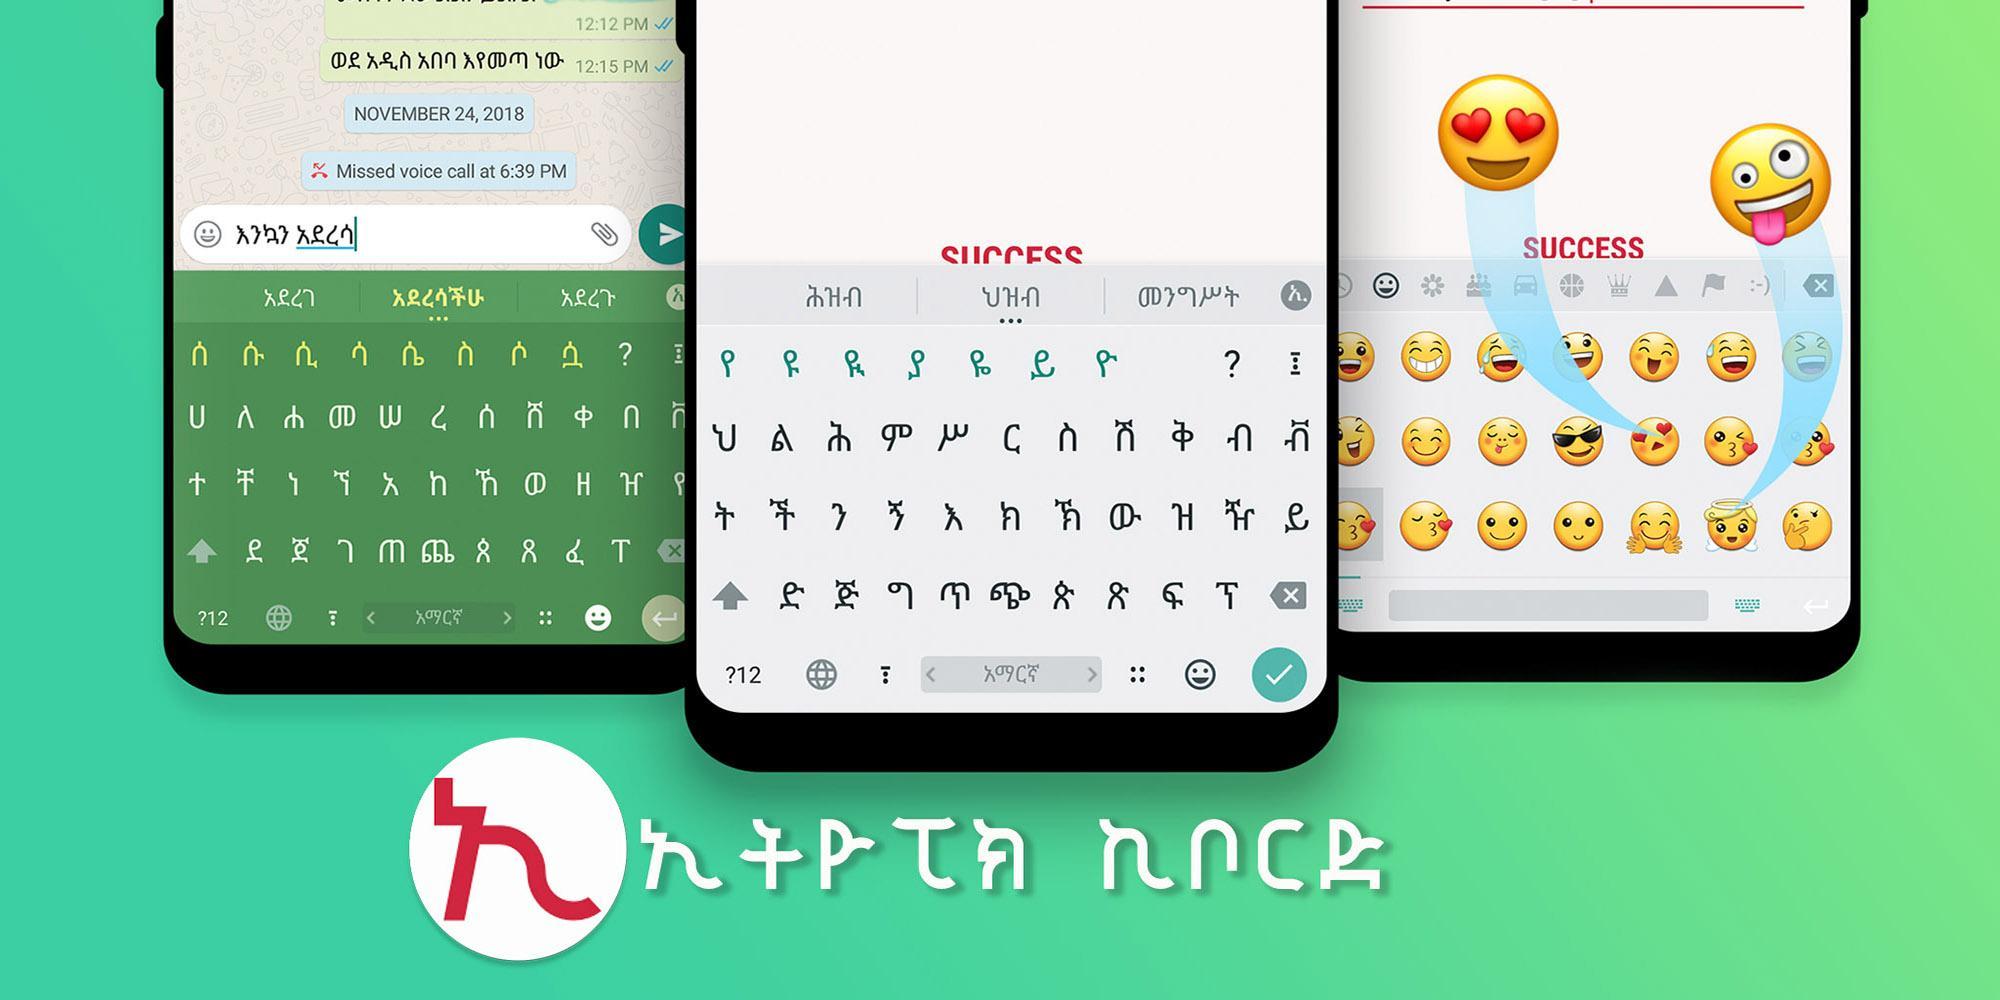 Amharic Keyboard - Ethiopic Geez for Android - APK Download